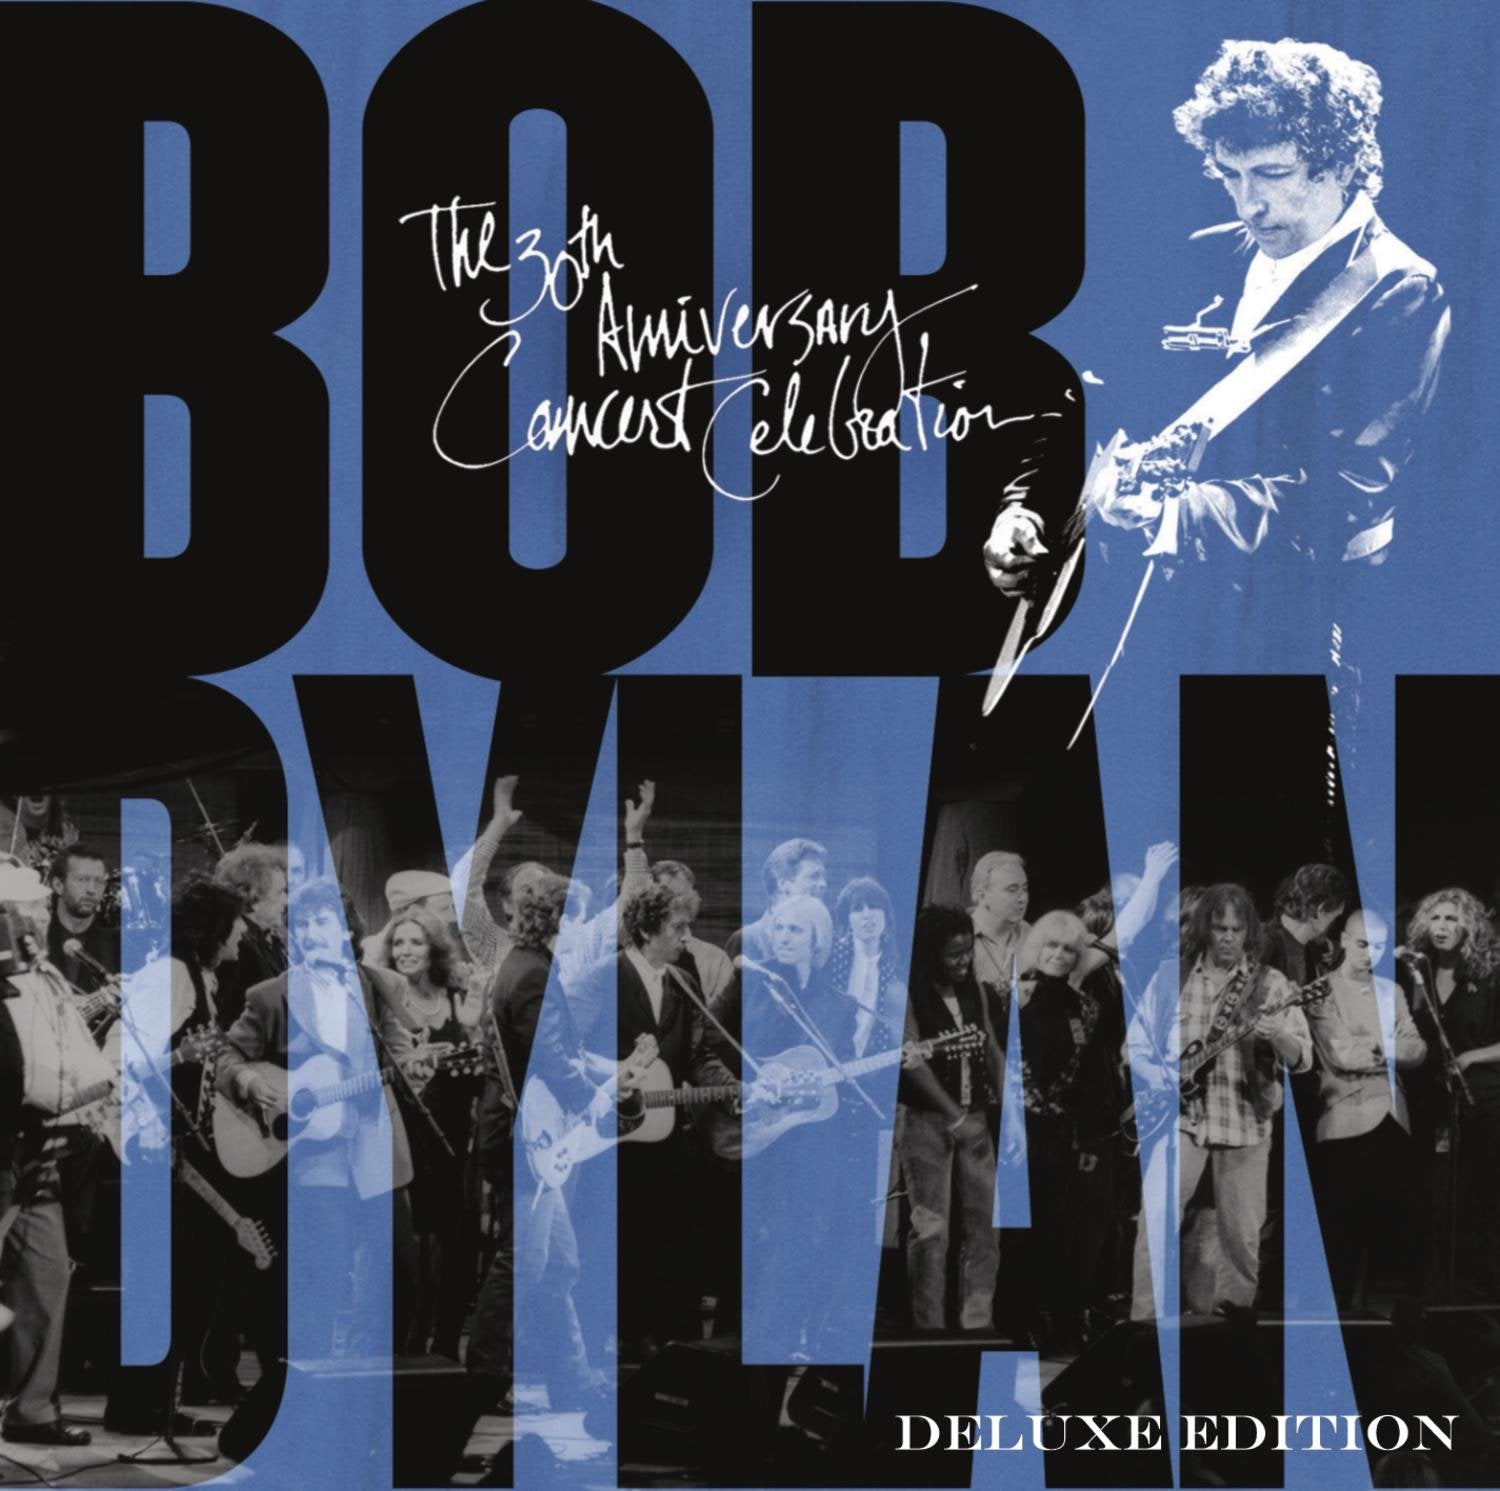 The 30th Anniversary Concert Celebration Deluxe Edition (4LP)